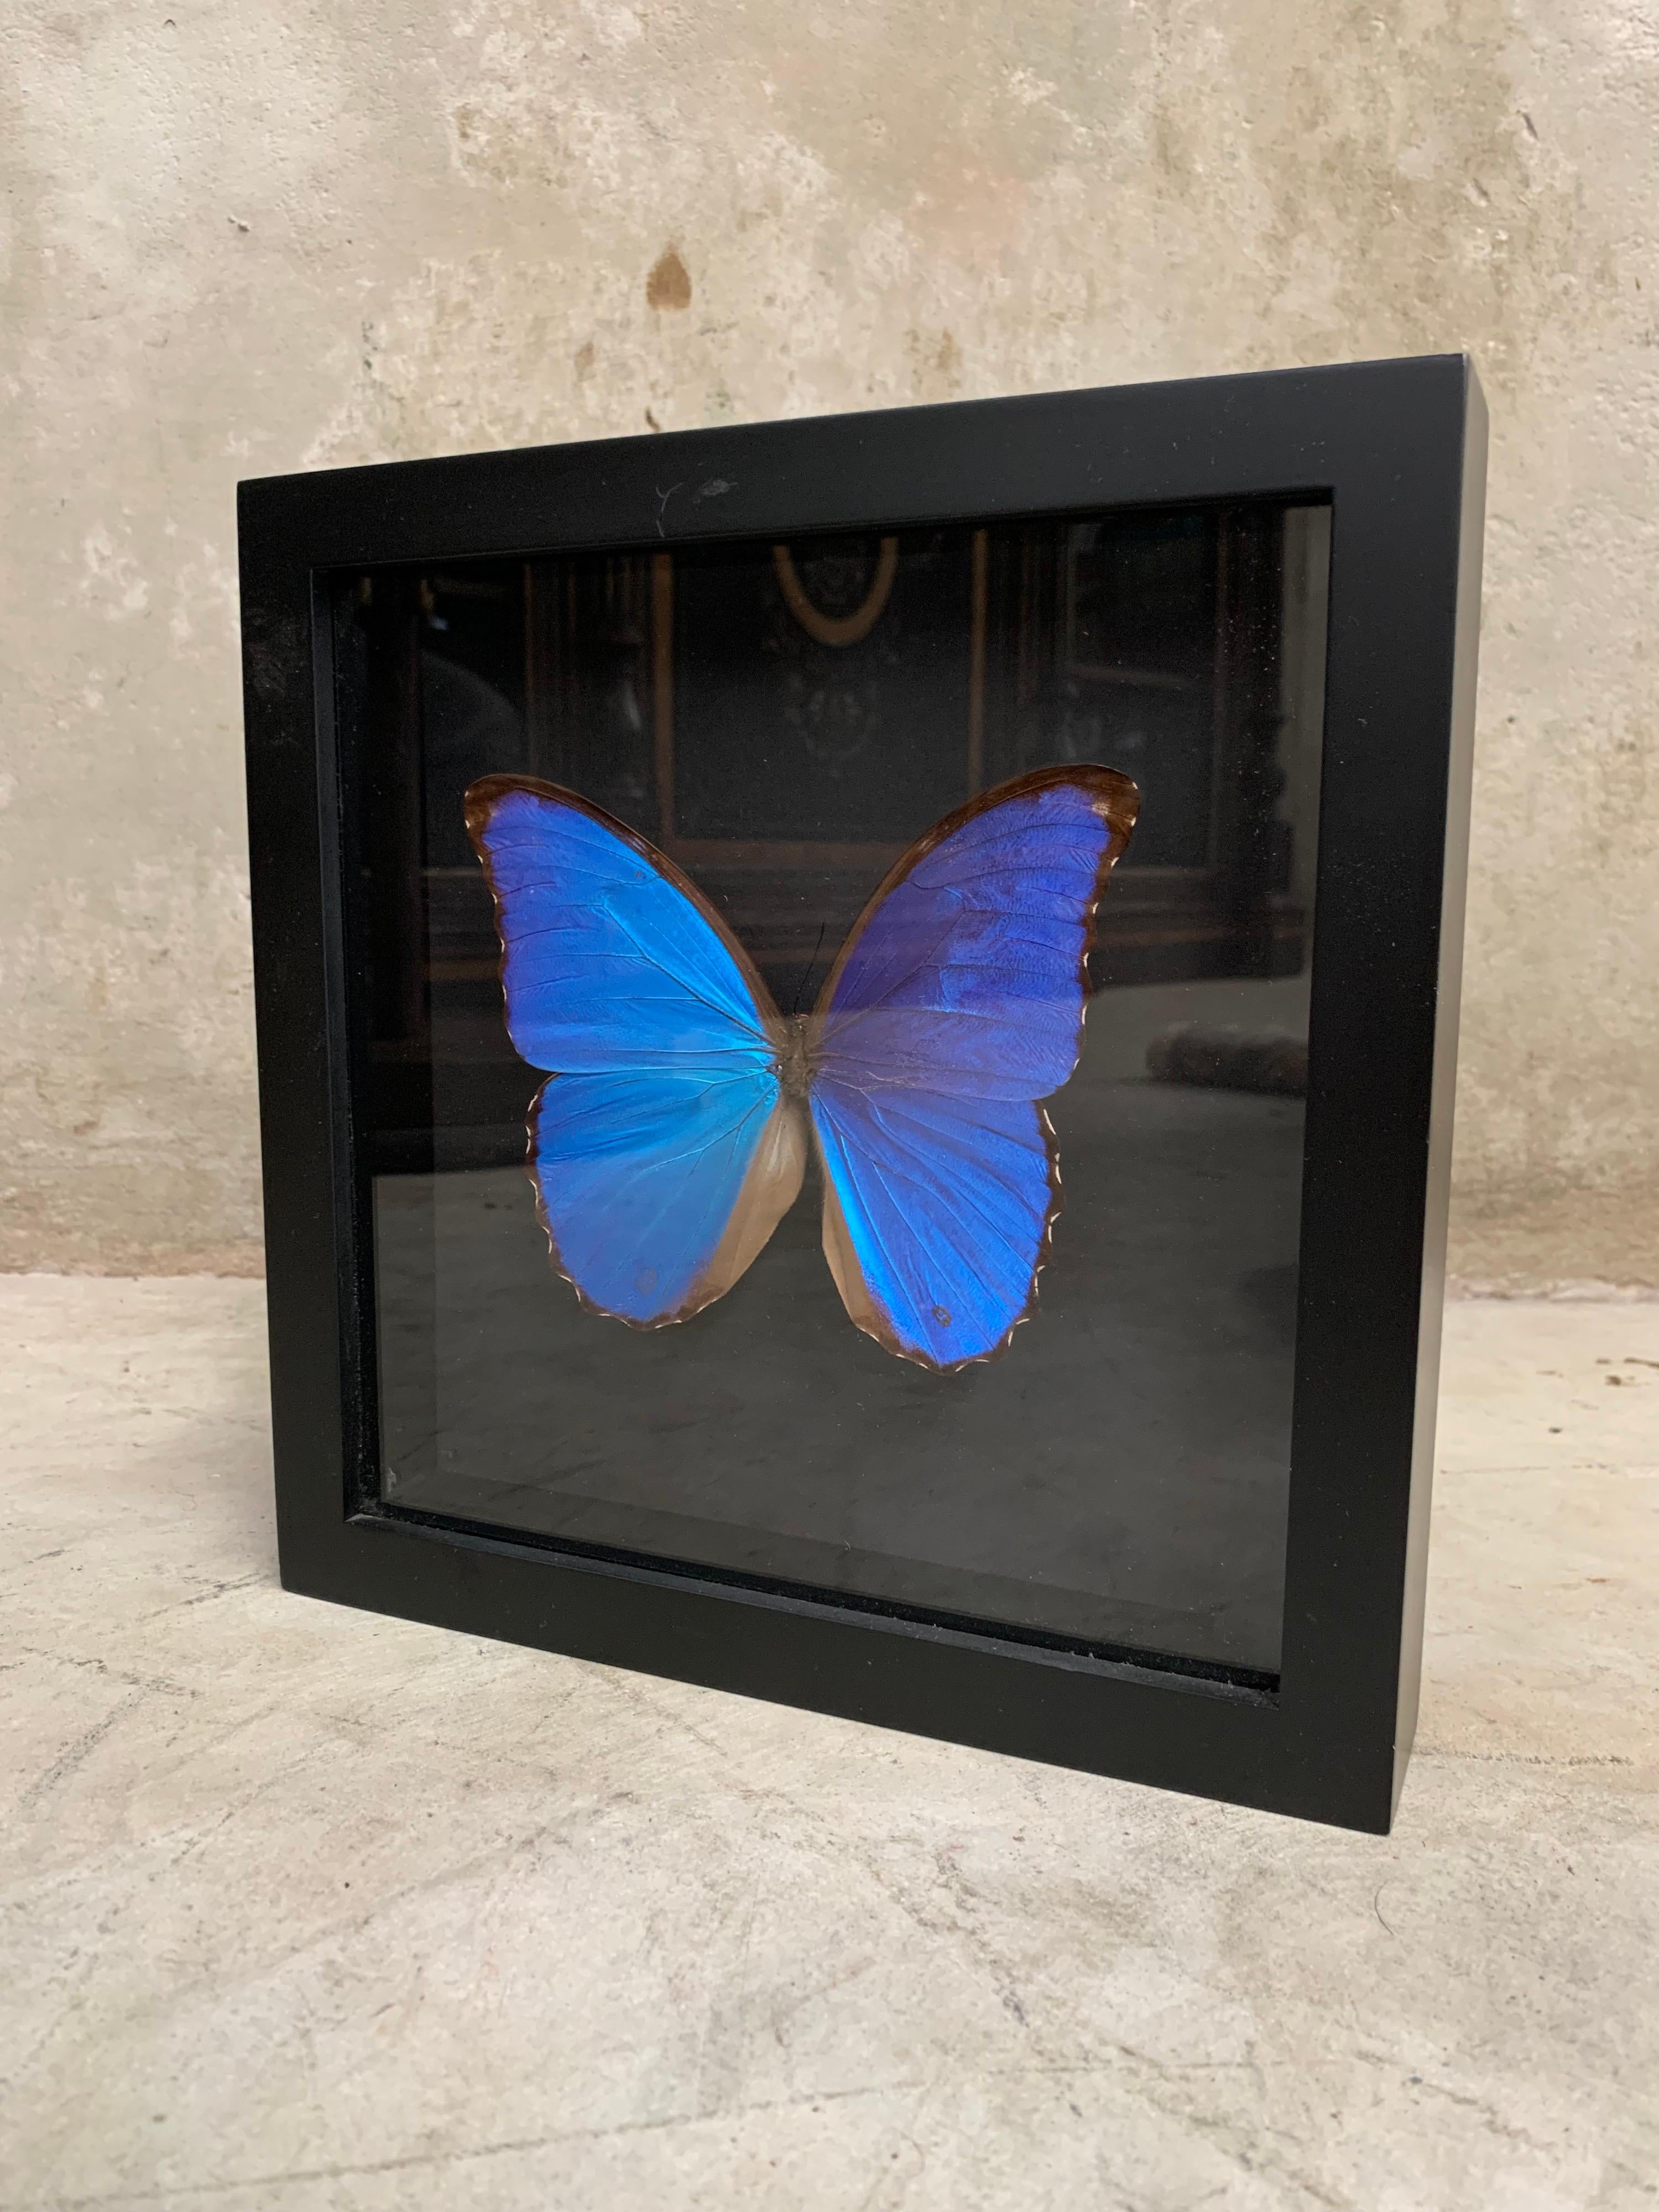 Very nice piece this giant Morpho Butterfly, which has been skilfully prepared. The details and colors are absolutely stunning. The glass and wood case can be hanged or placed like a picture stand. Non Cites species.

The case is 25 cm x 25 cm x